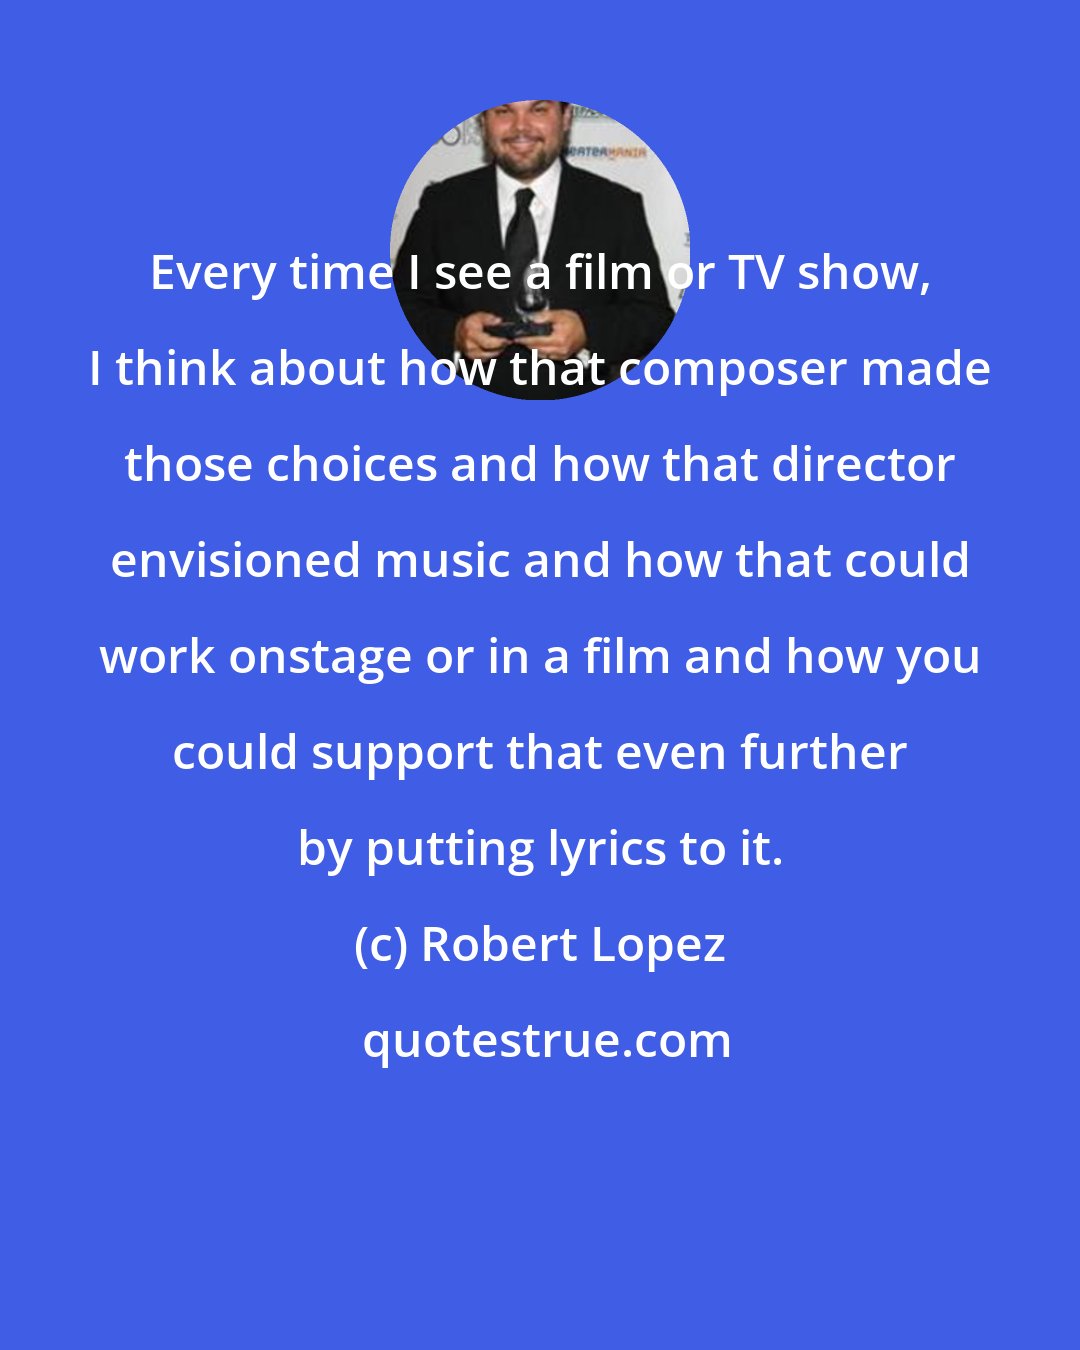 Robert Lopez: Every time I see a film or TV show, I think about how that composer made those choices and how that director envisioned music and how that could work onstage or in a film and how you could support that even further by putting lyrics to it.